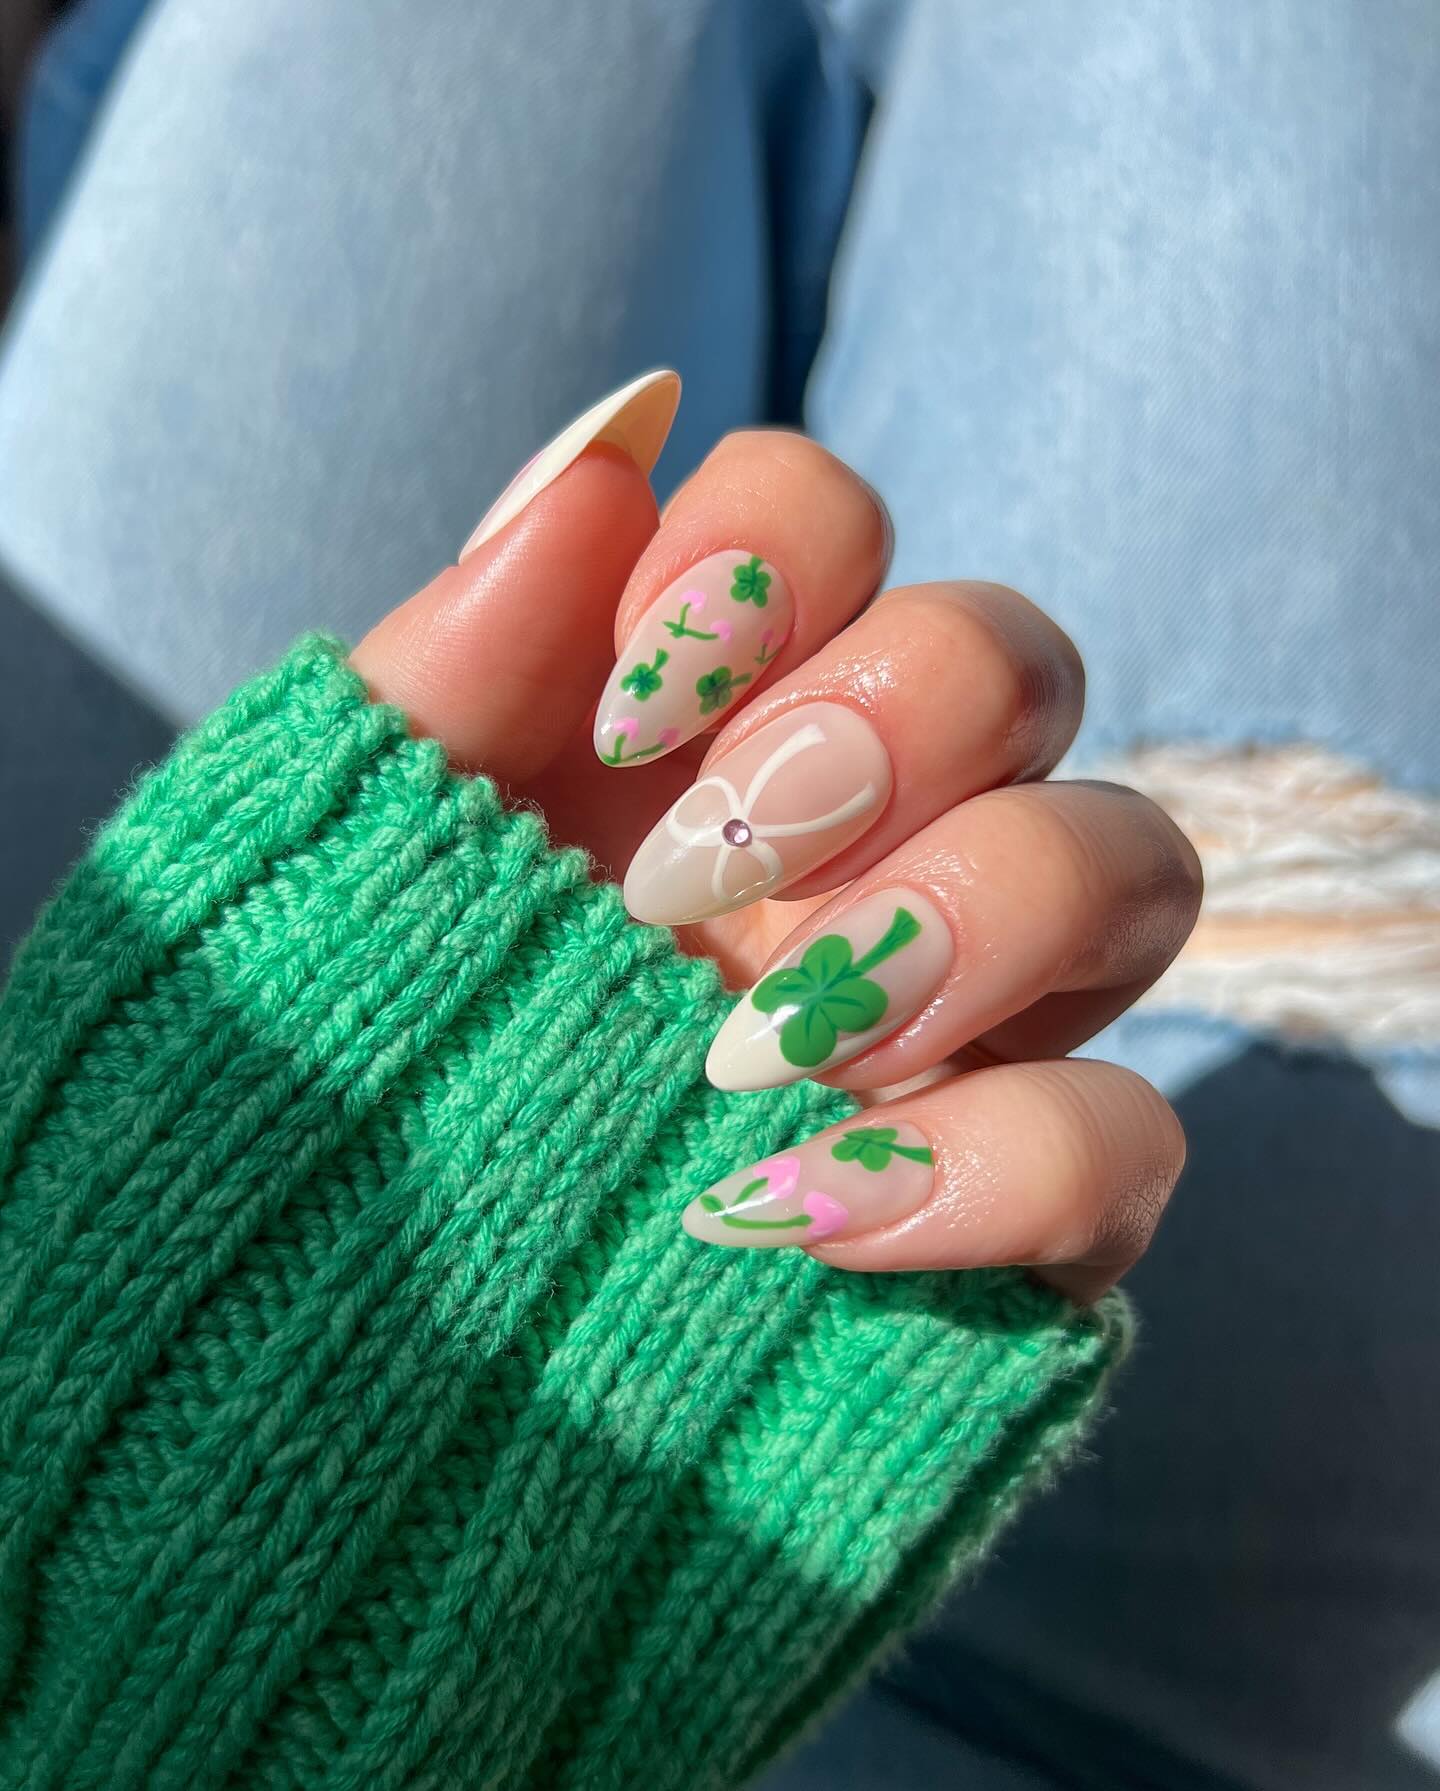 100+ Short Nail Designs You’ll Want To Try This Year images 85